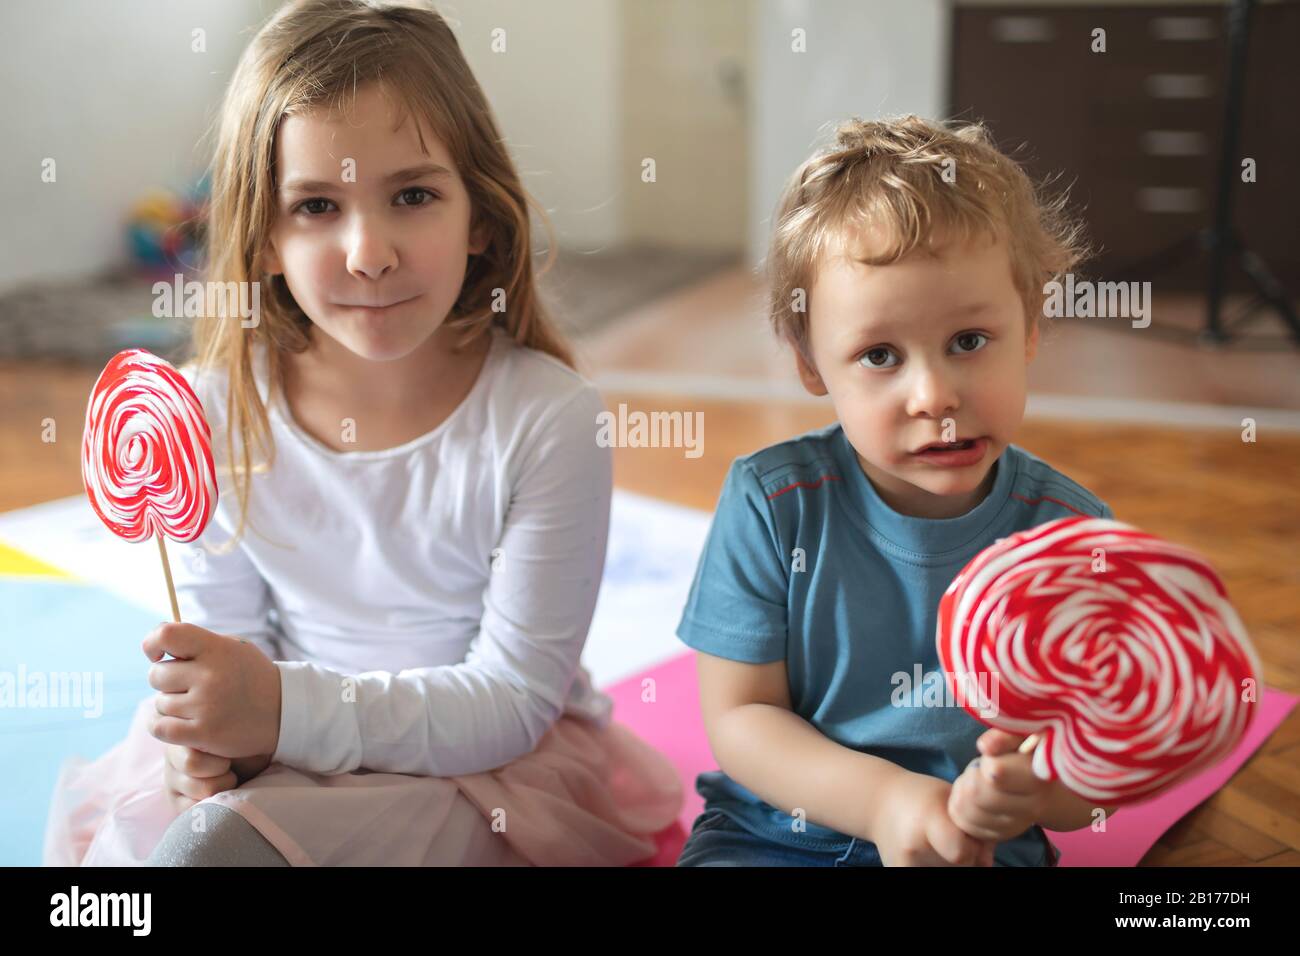 Two kids play and eat lollypops Stock Photo